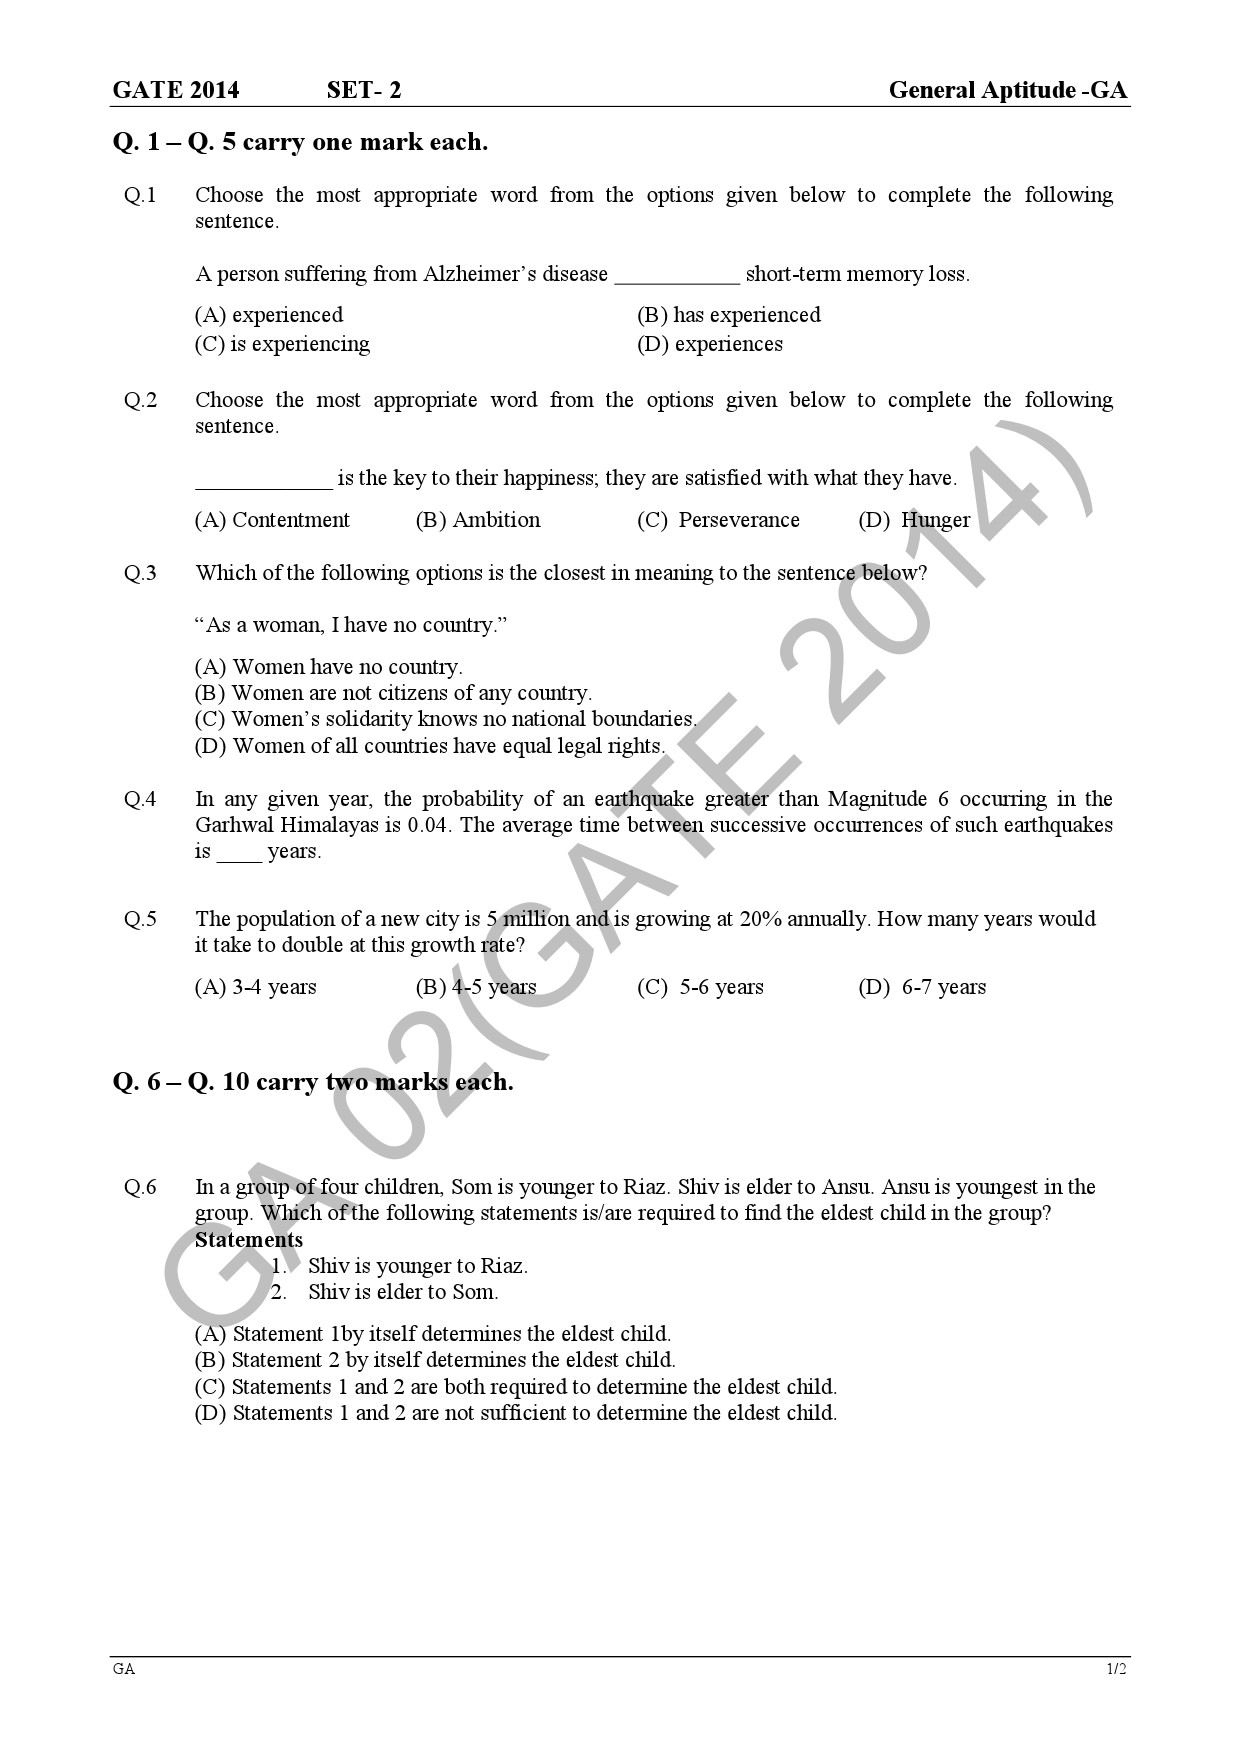 GATE Exam Question Paper 2014 Geology and Geophysics 5